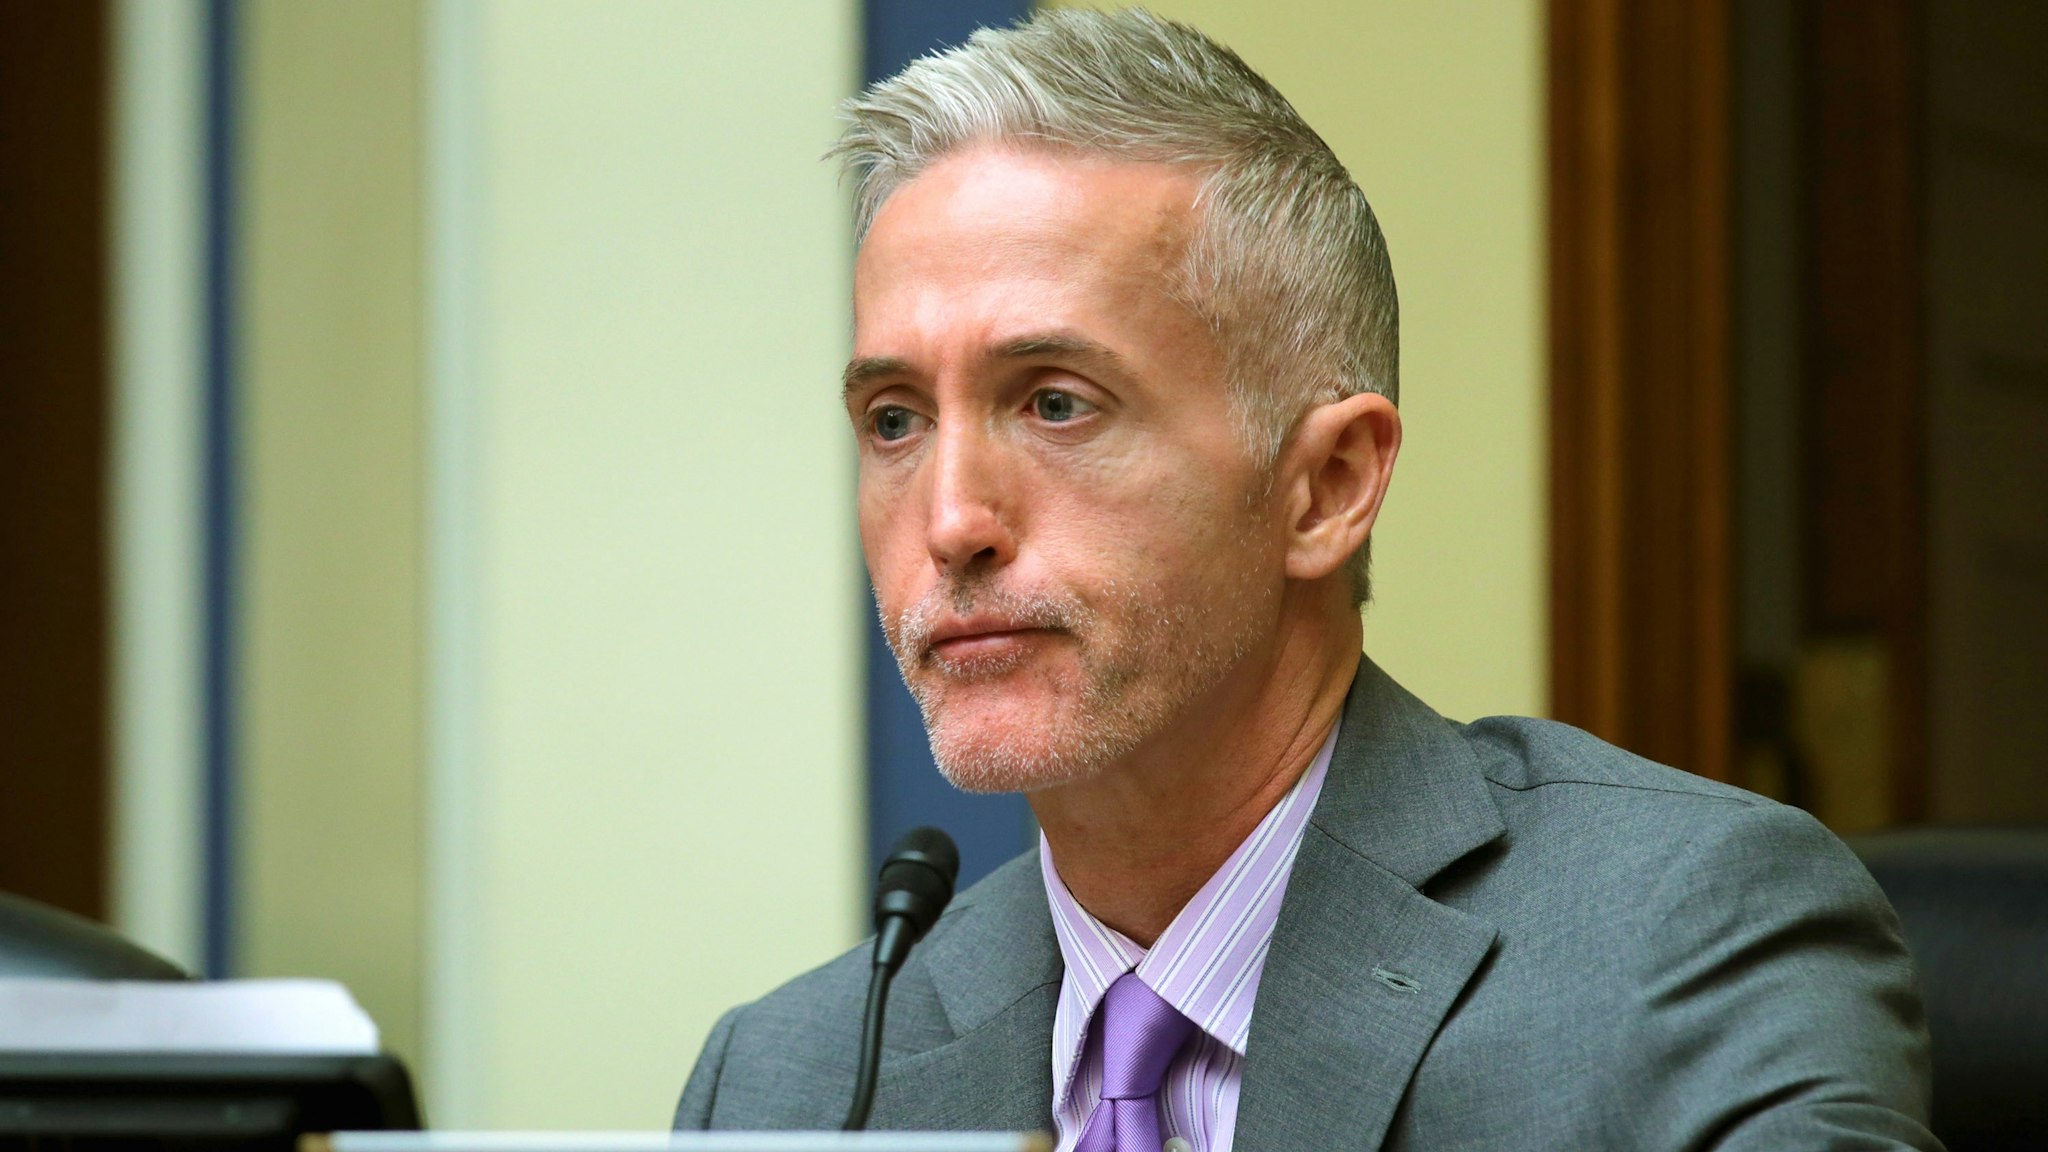 WASHINGTON, DC - NOVEMBER 03: The House Oversight and Government Reform Committee's Select Committee on Benghazi Chairman Trey Gowdy (R-SC) sports the beginnings of a beard as he questions witnesses about lapses in TSA screening in the Rayburn House Office Building on Capitol Hill November 3, 2015 in Washington, DC. Leaked to the news media earlier this year, a TSA inspector general's report found that investigators were able to slip through airport security with weapons and phony bombs more than 95 percent of the time at different airports across the country, constituting 'significant breeches,' according to Homeland Security Inspector General John Roth.